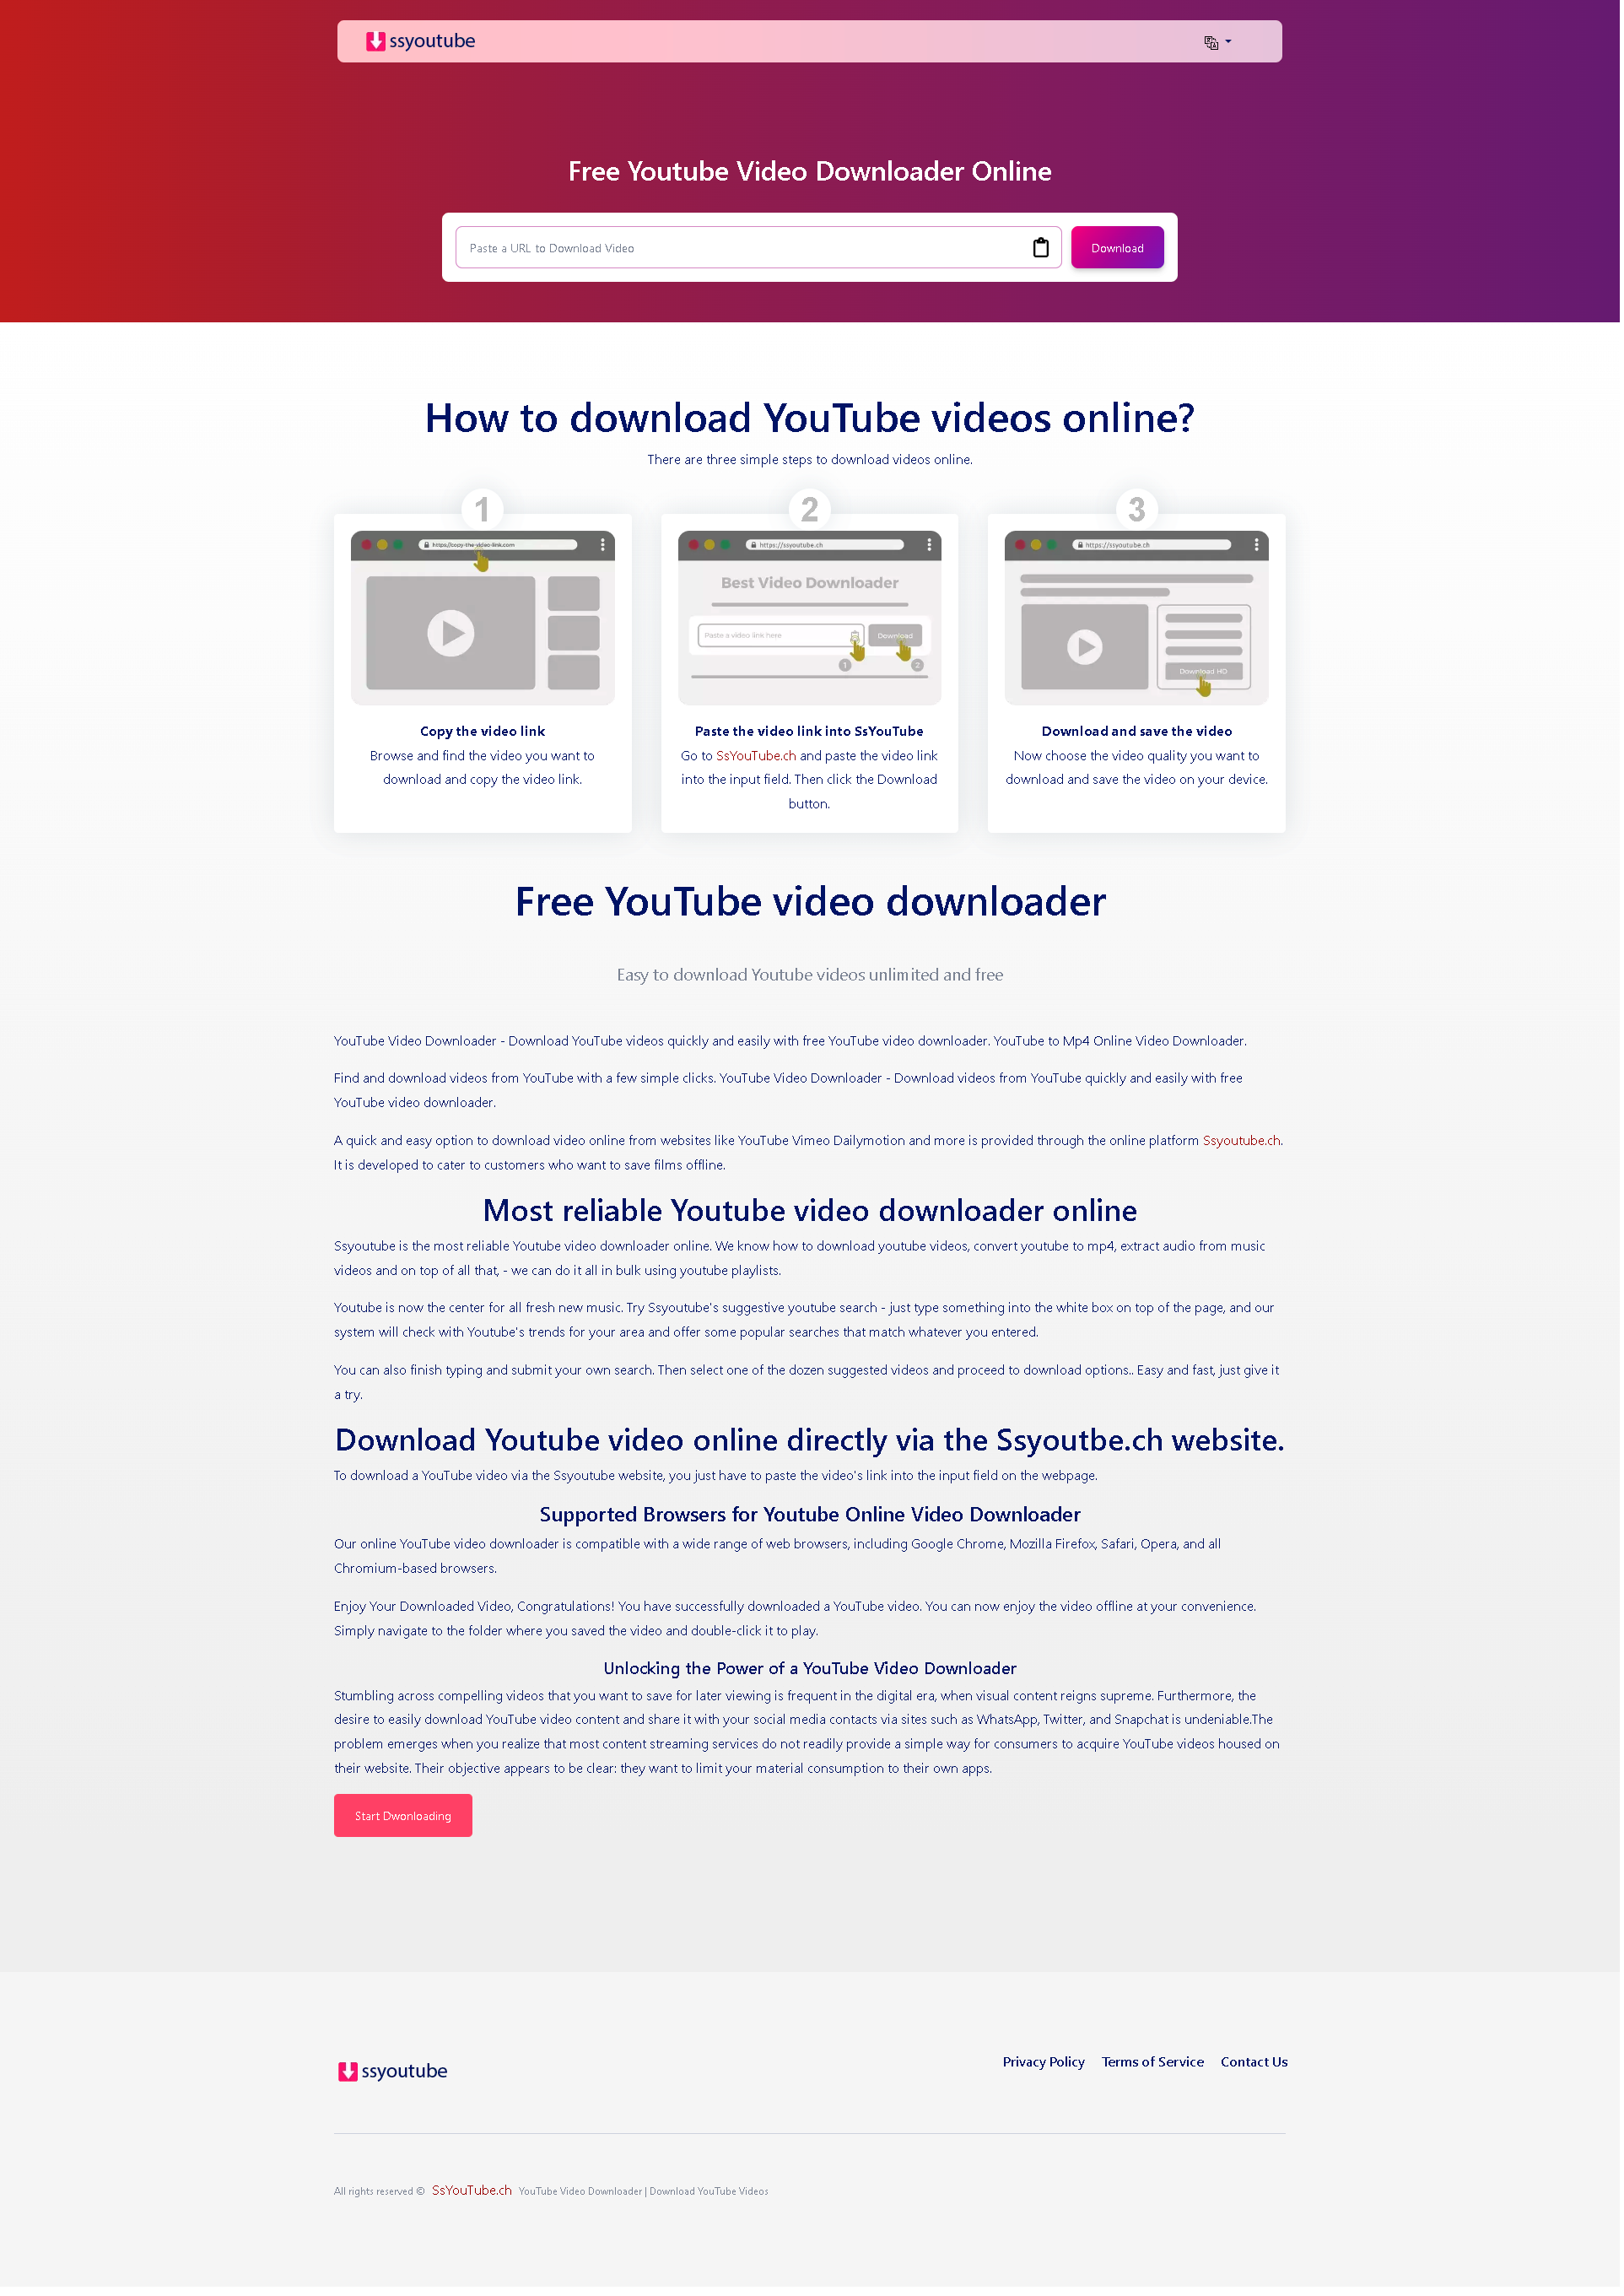 SSYouTube.ch Landing page